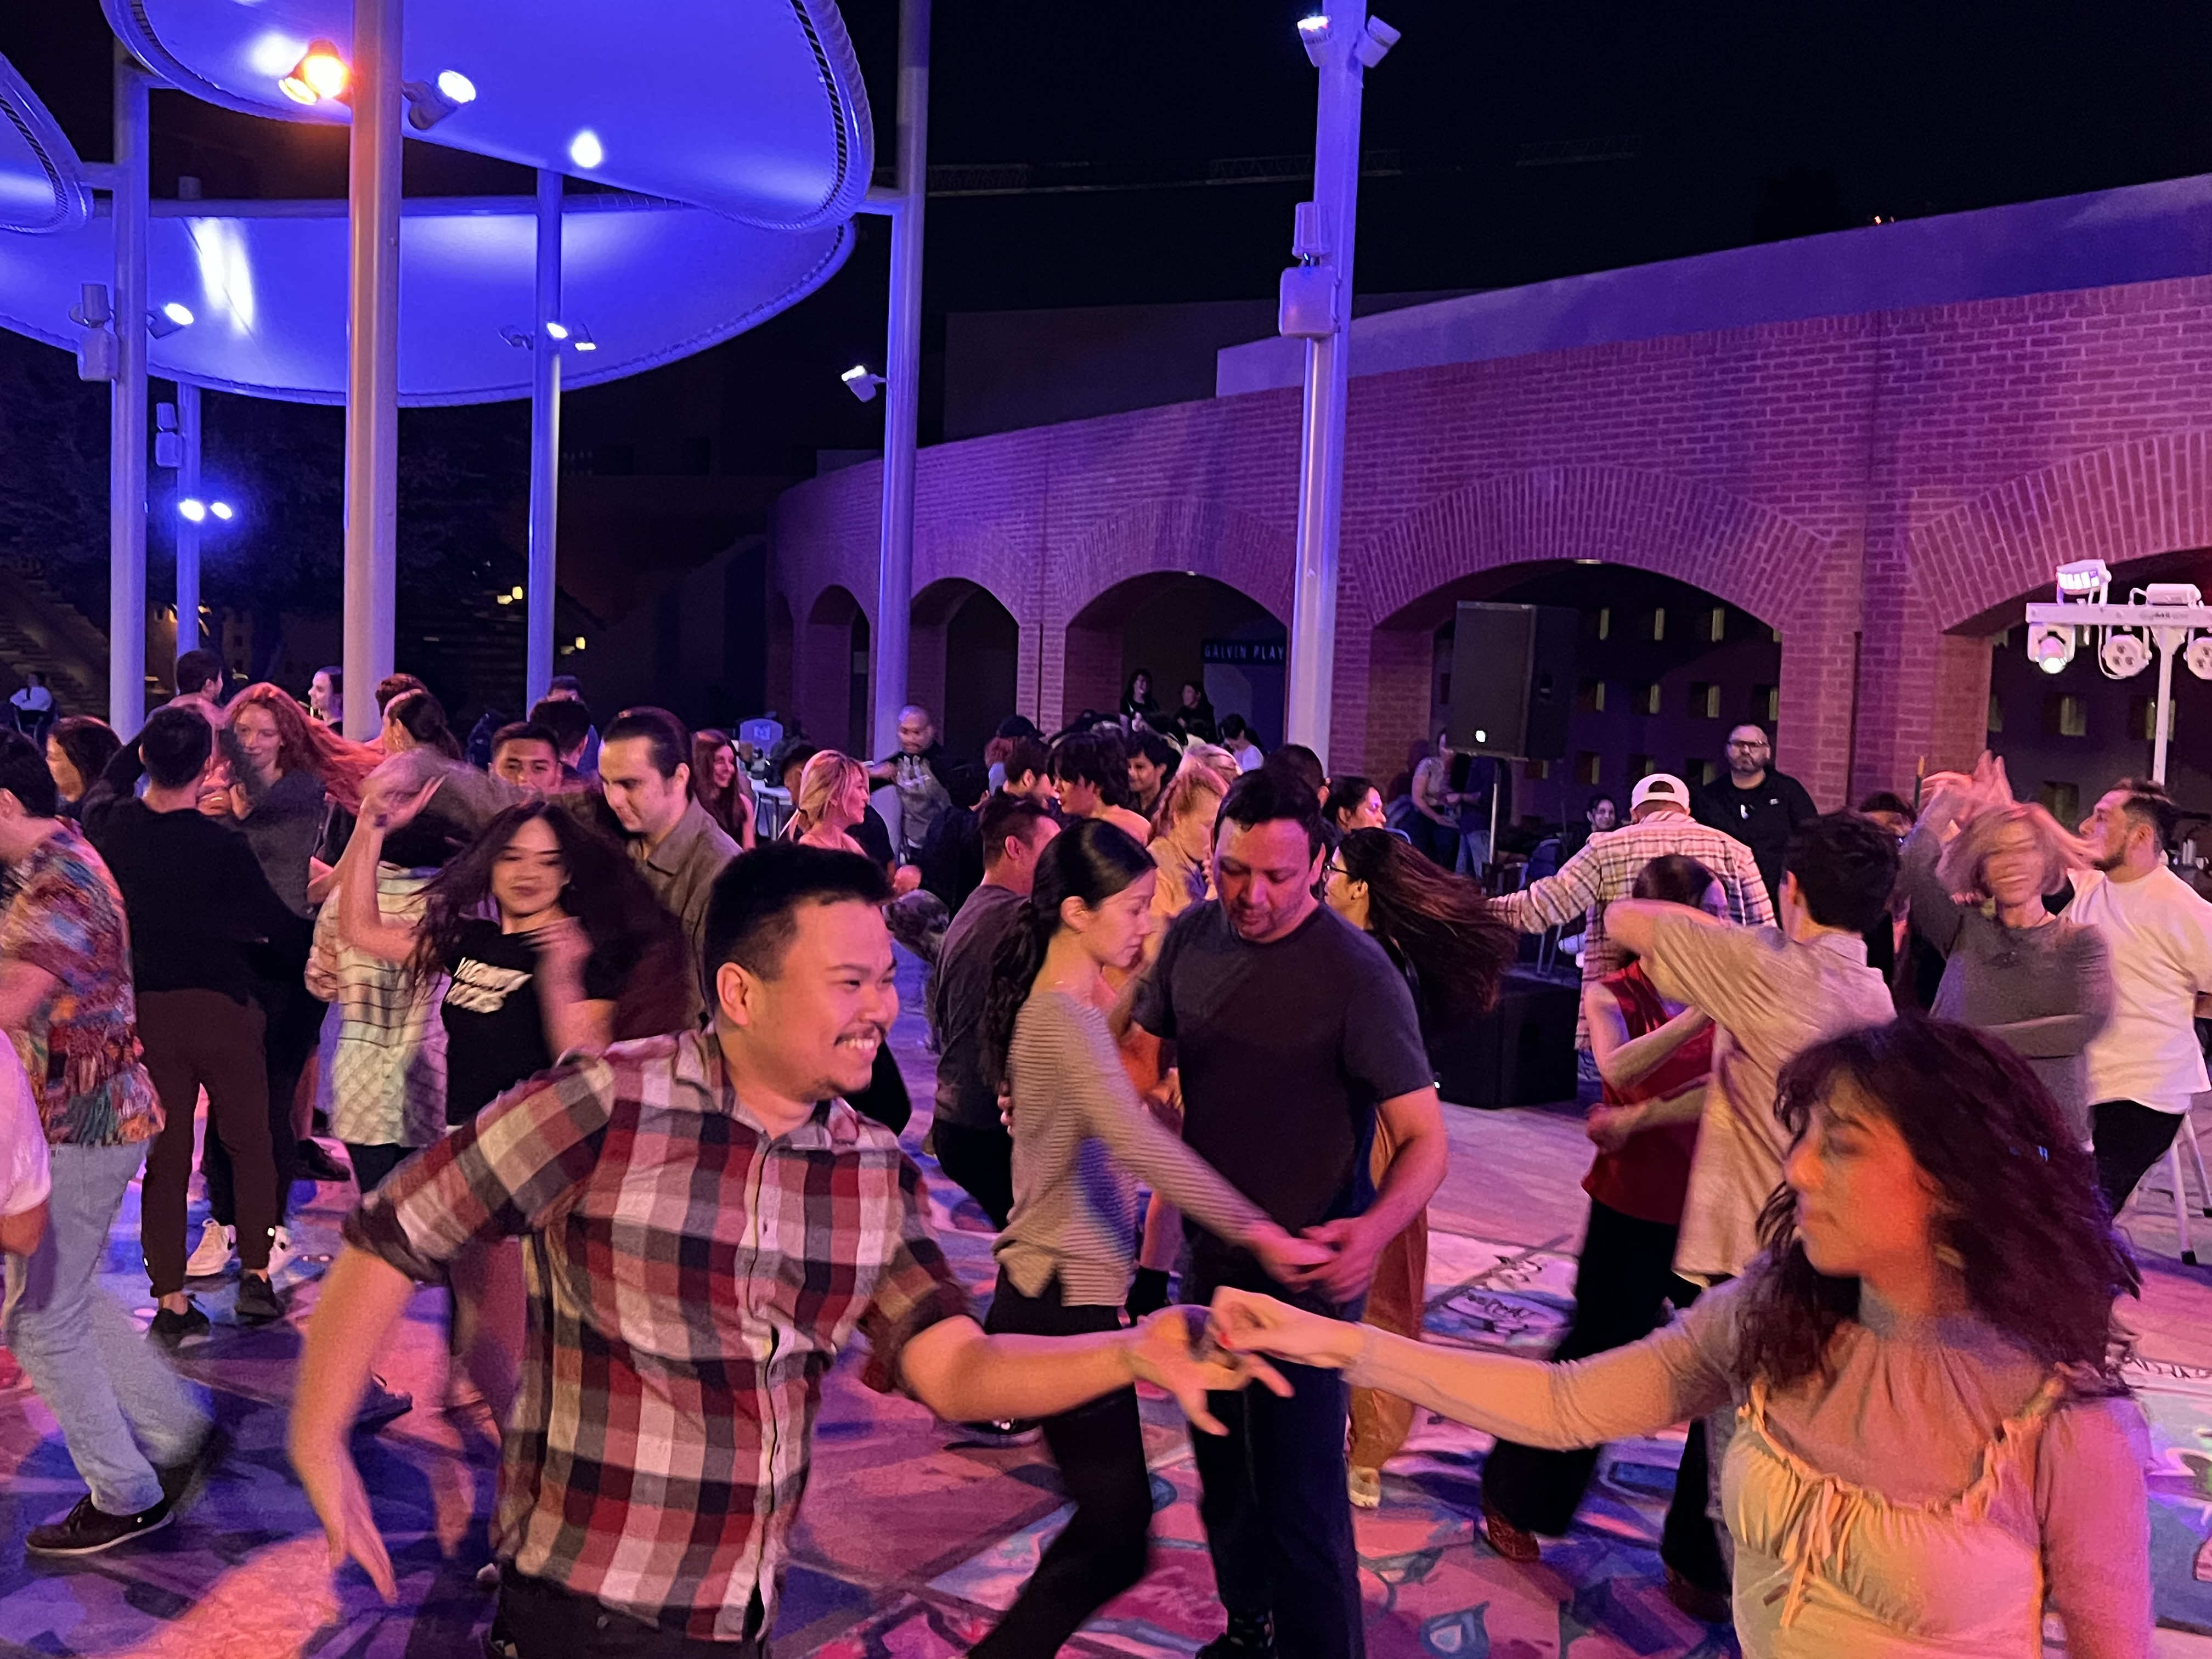 Students dance salsa outside under the colored lights at Nelson Fine Arts Plaza